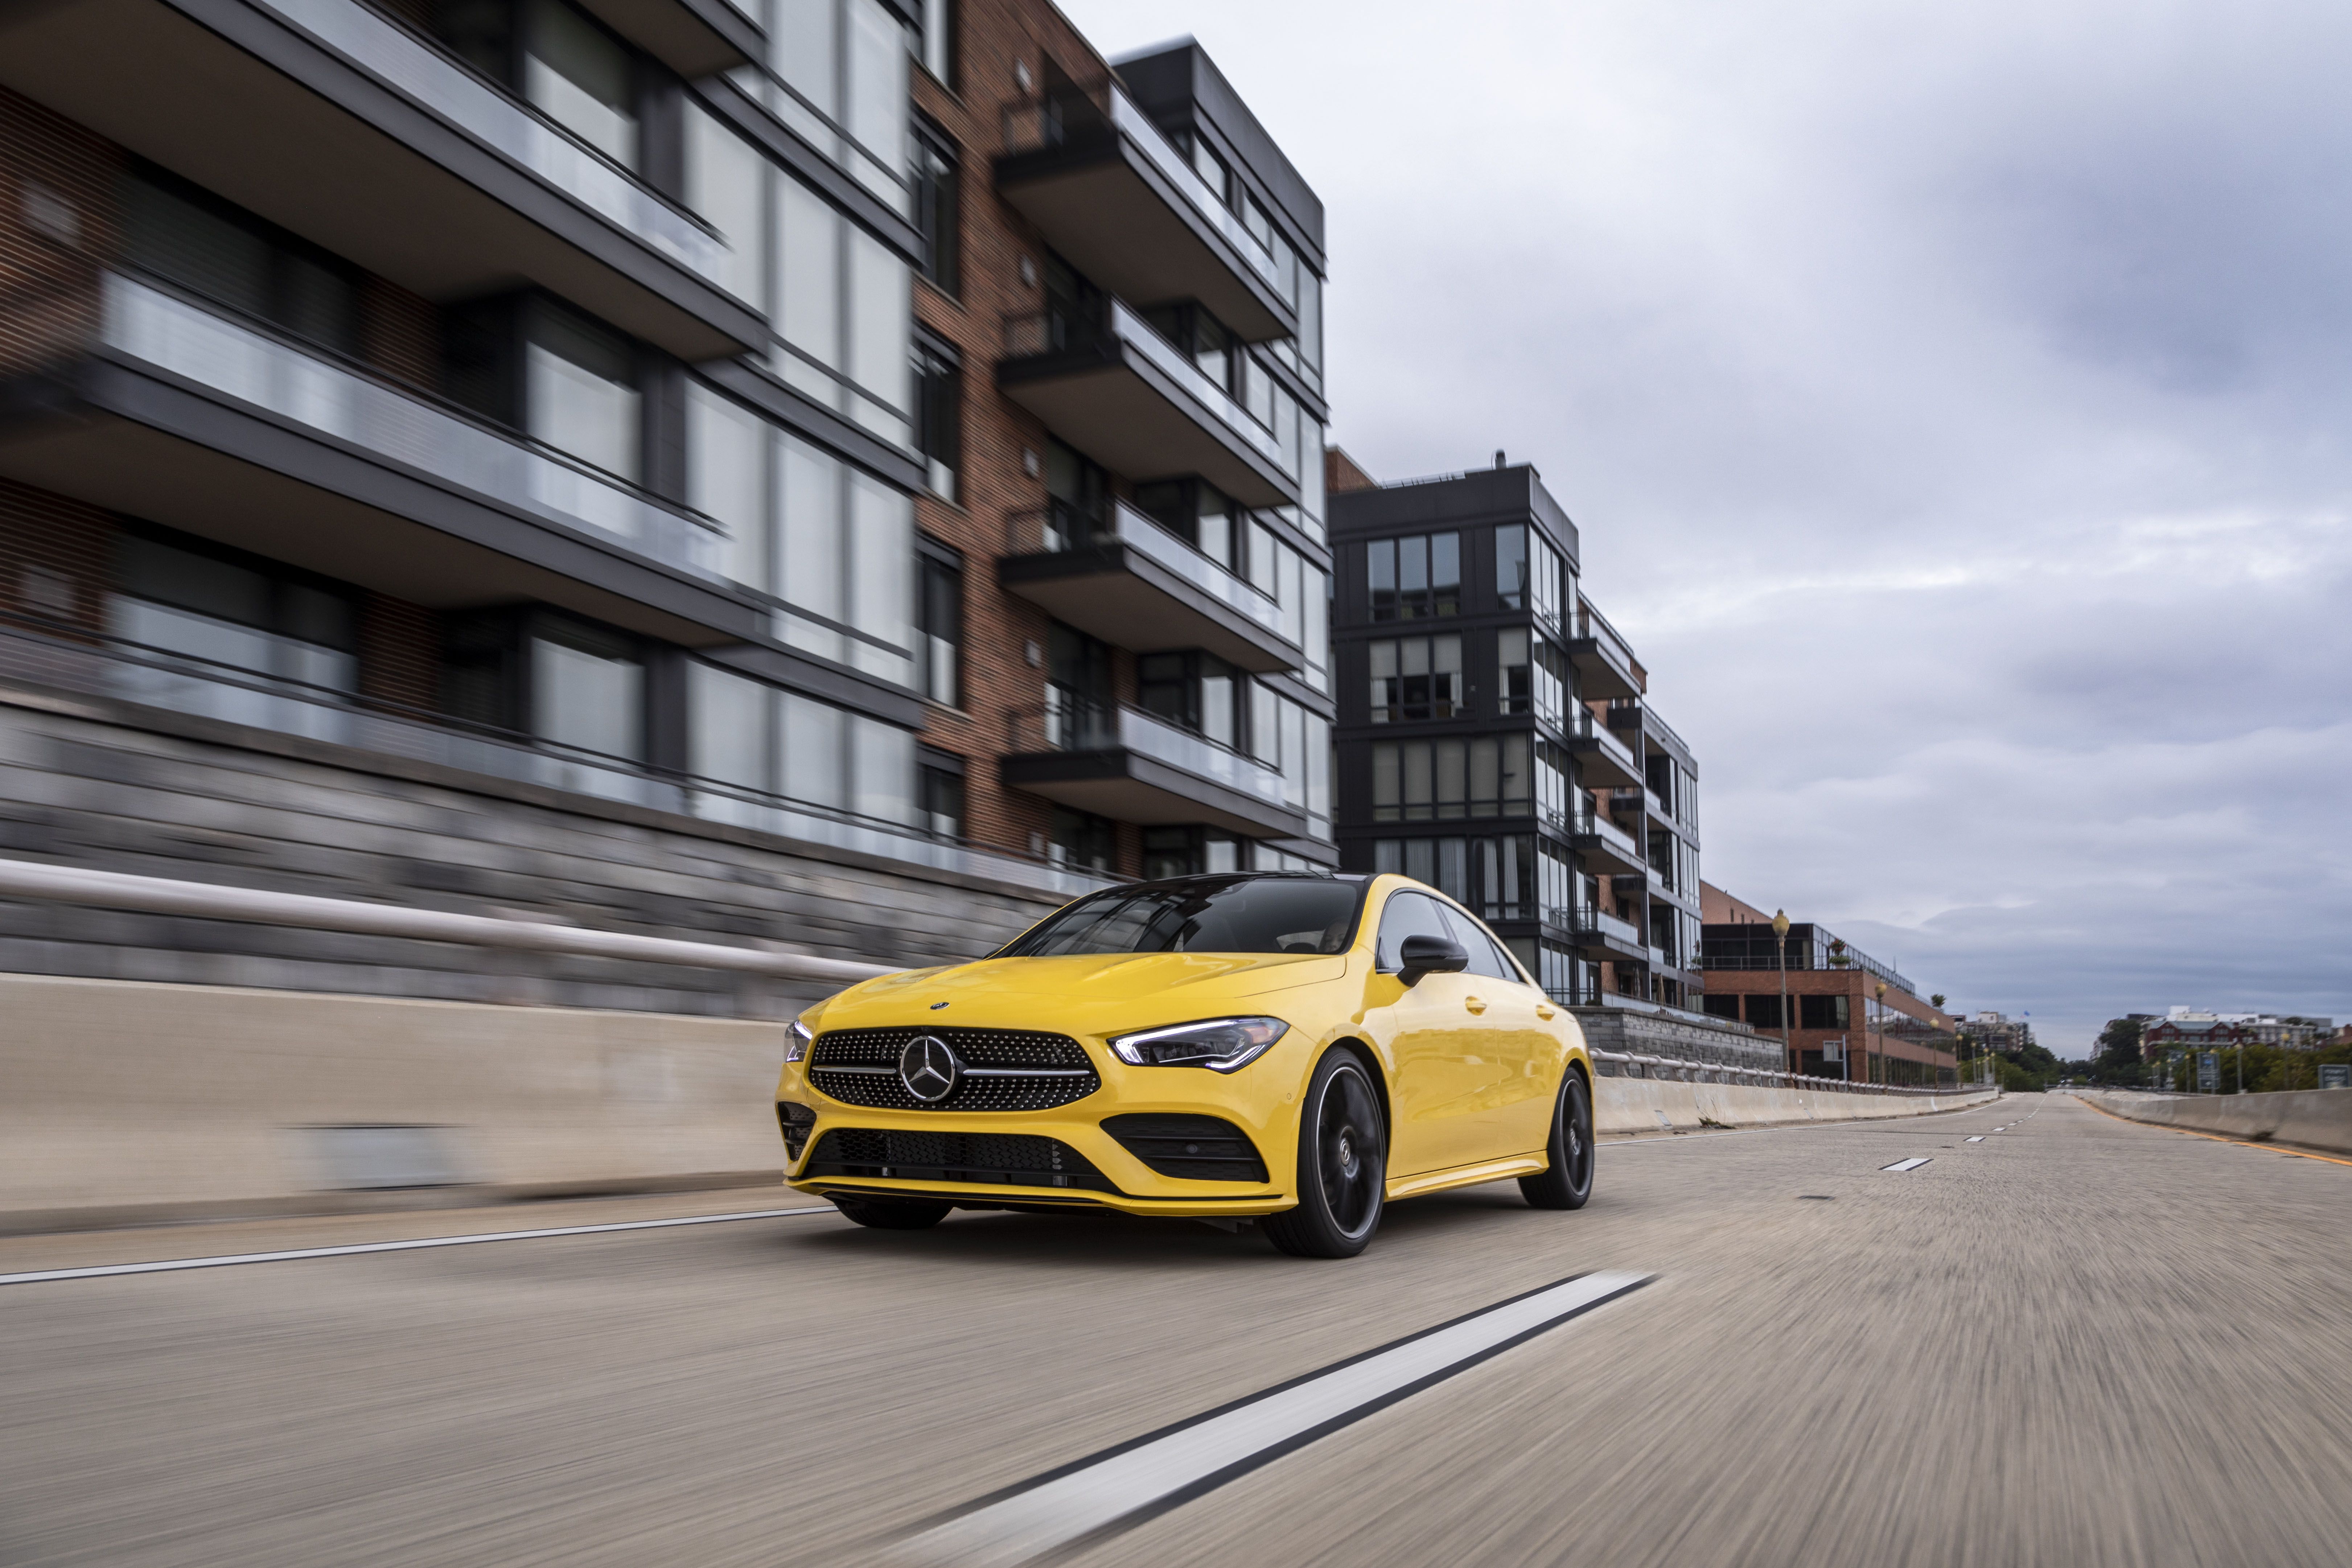 Discontinued CLA 45 AMG 4MATIC [2017-2019] on road Price  Mercedes-Benz CLA  45 AMG 4MATIC [2017-2019] Features & Specs